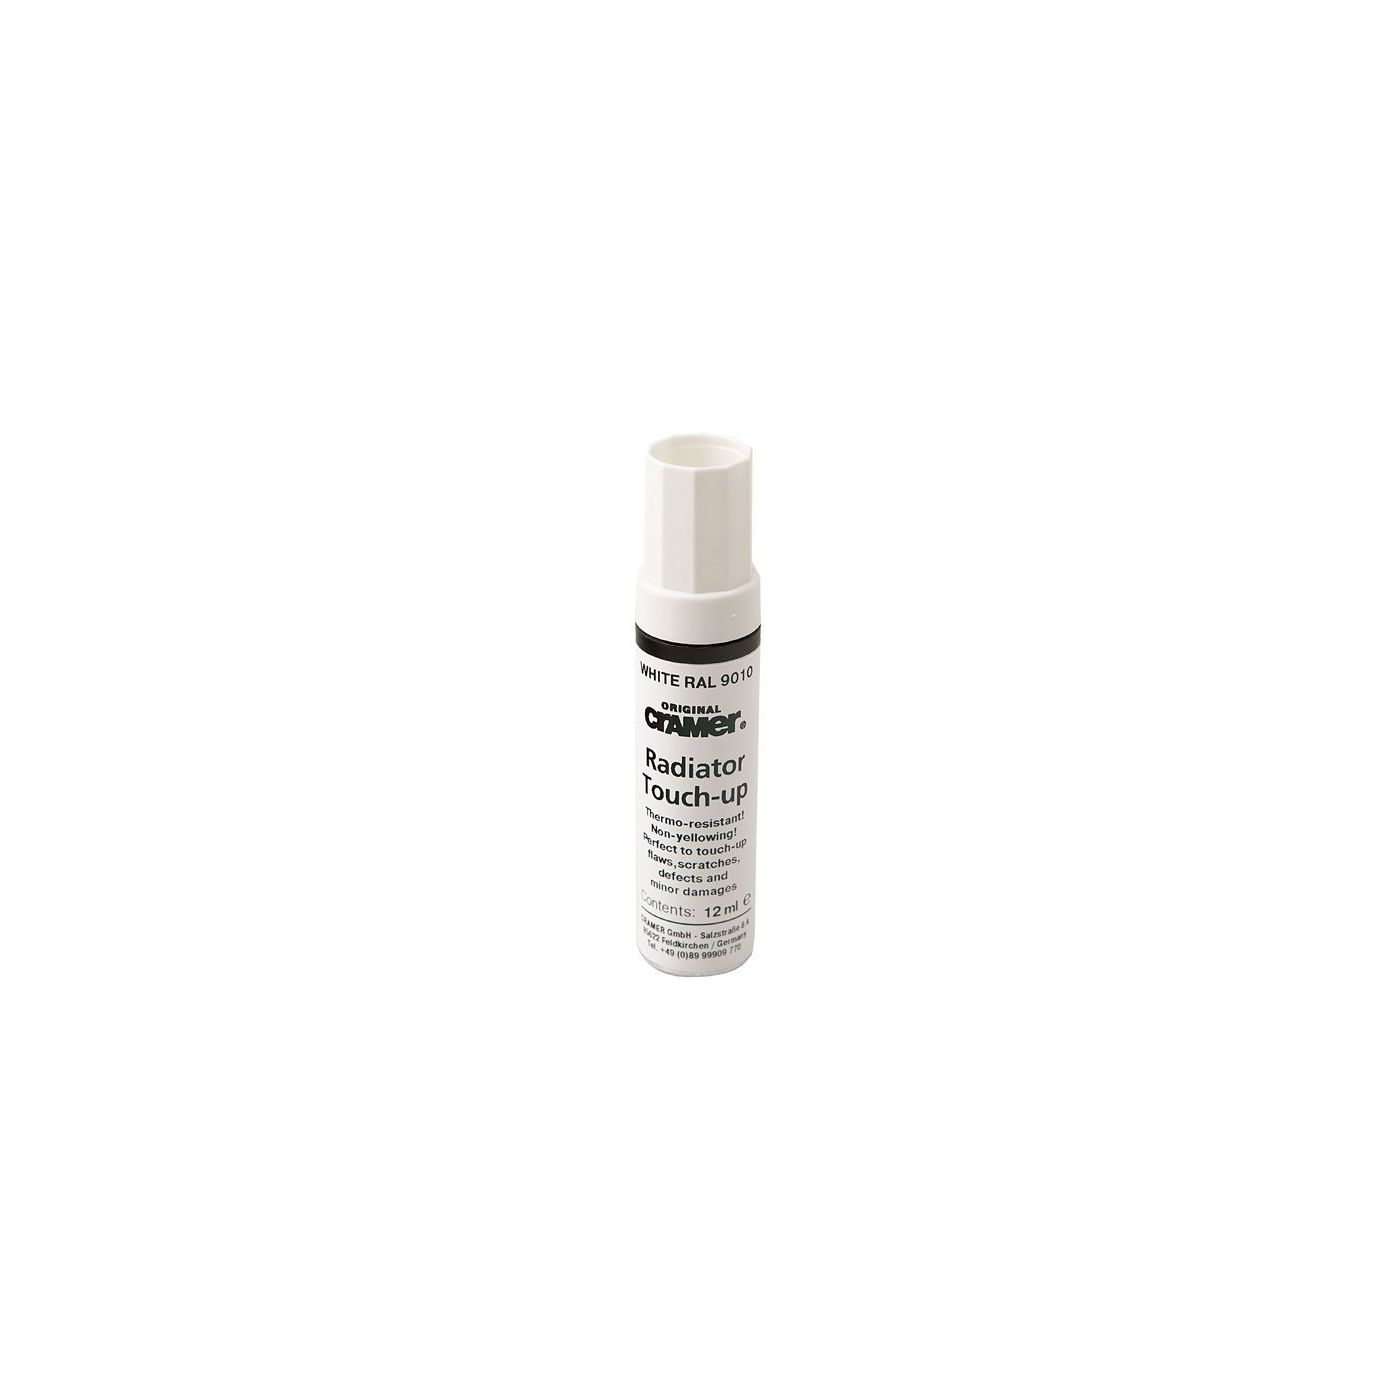 Touch Stick voor radiator 12ml wit